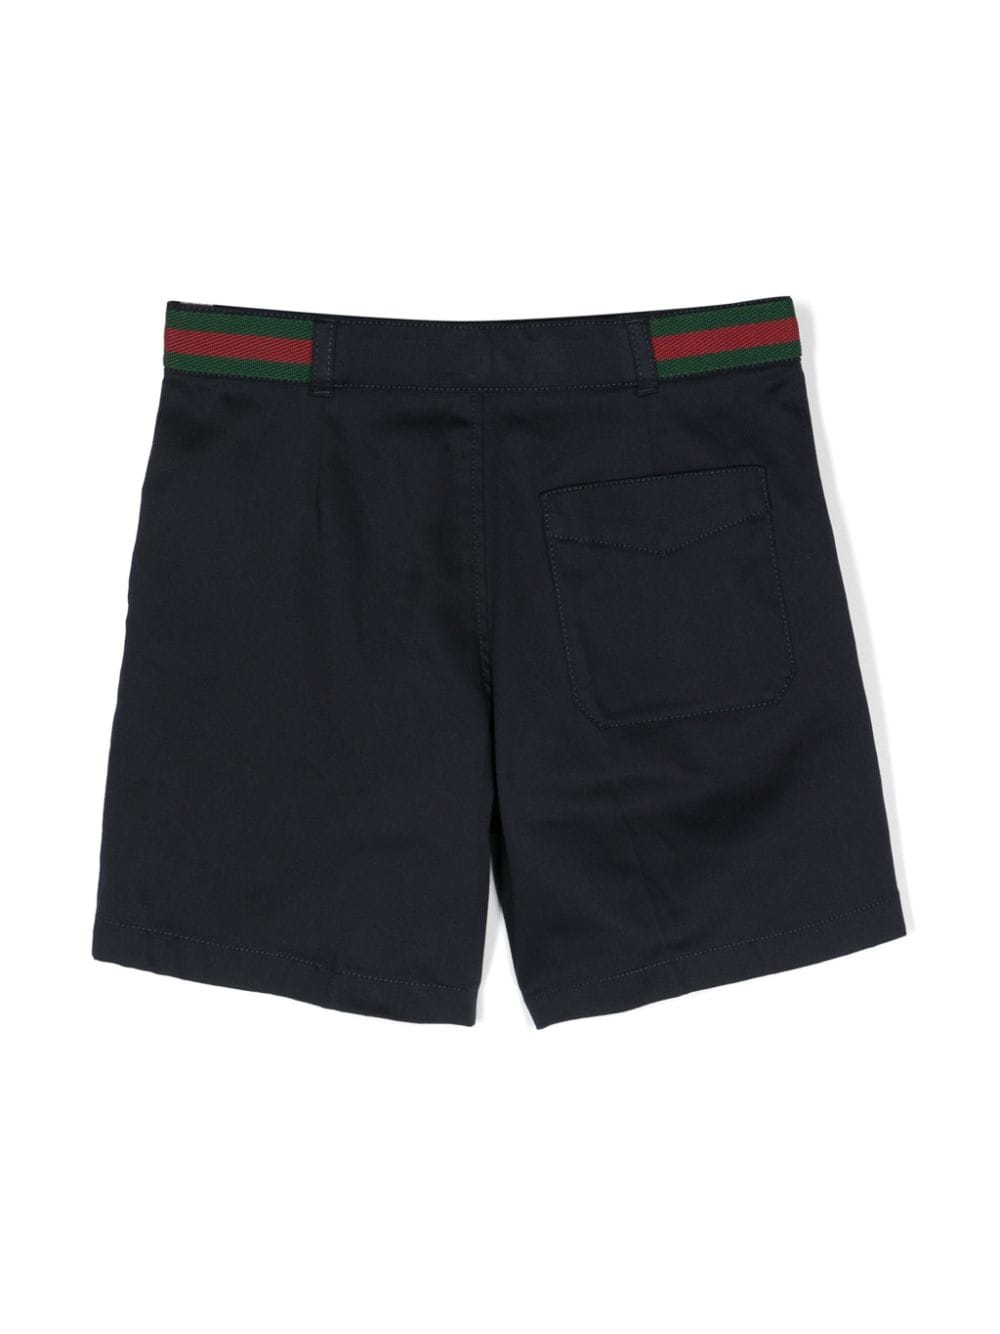 Blue Bermuda shorts for boys in cotton